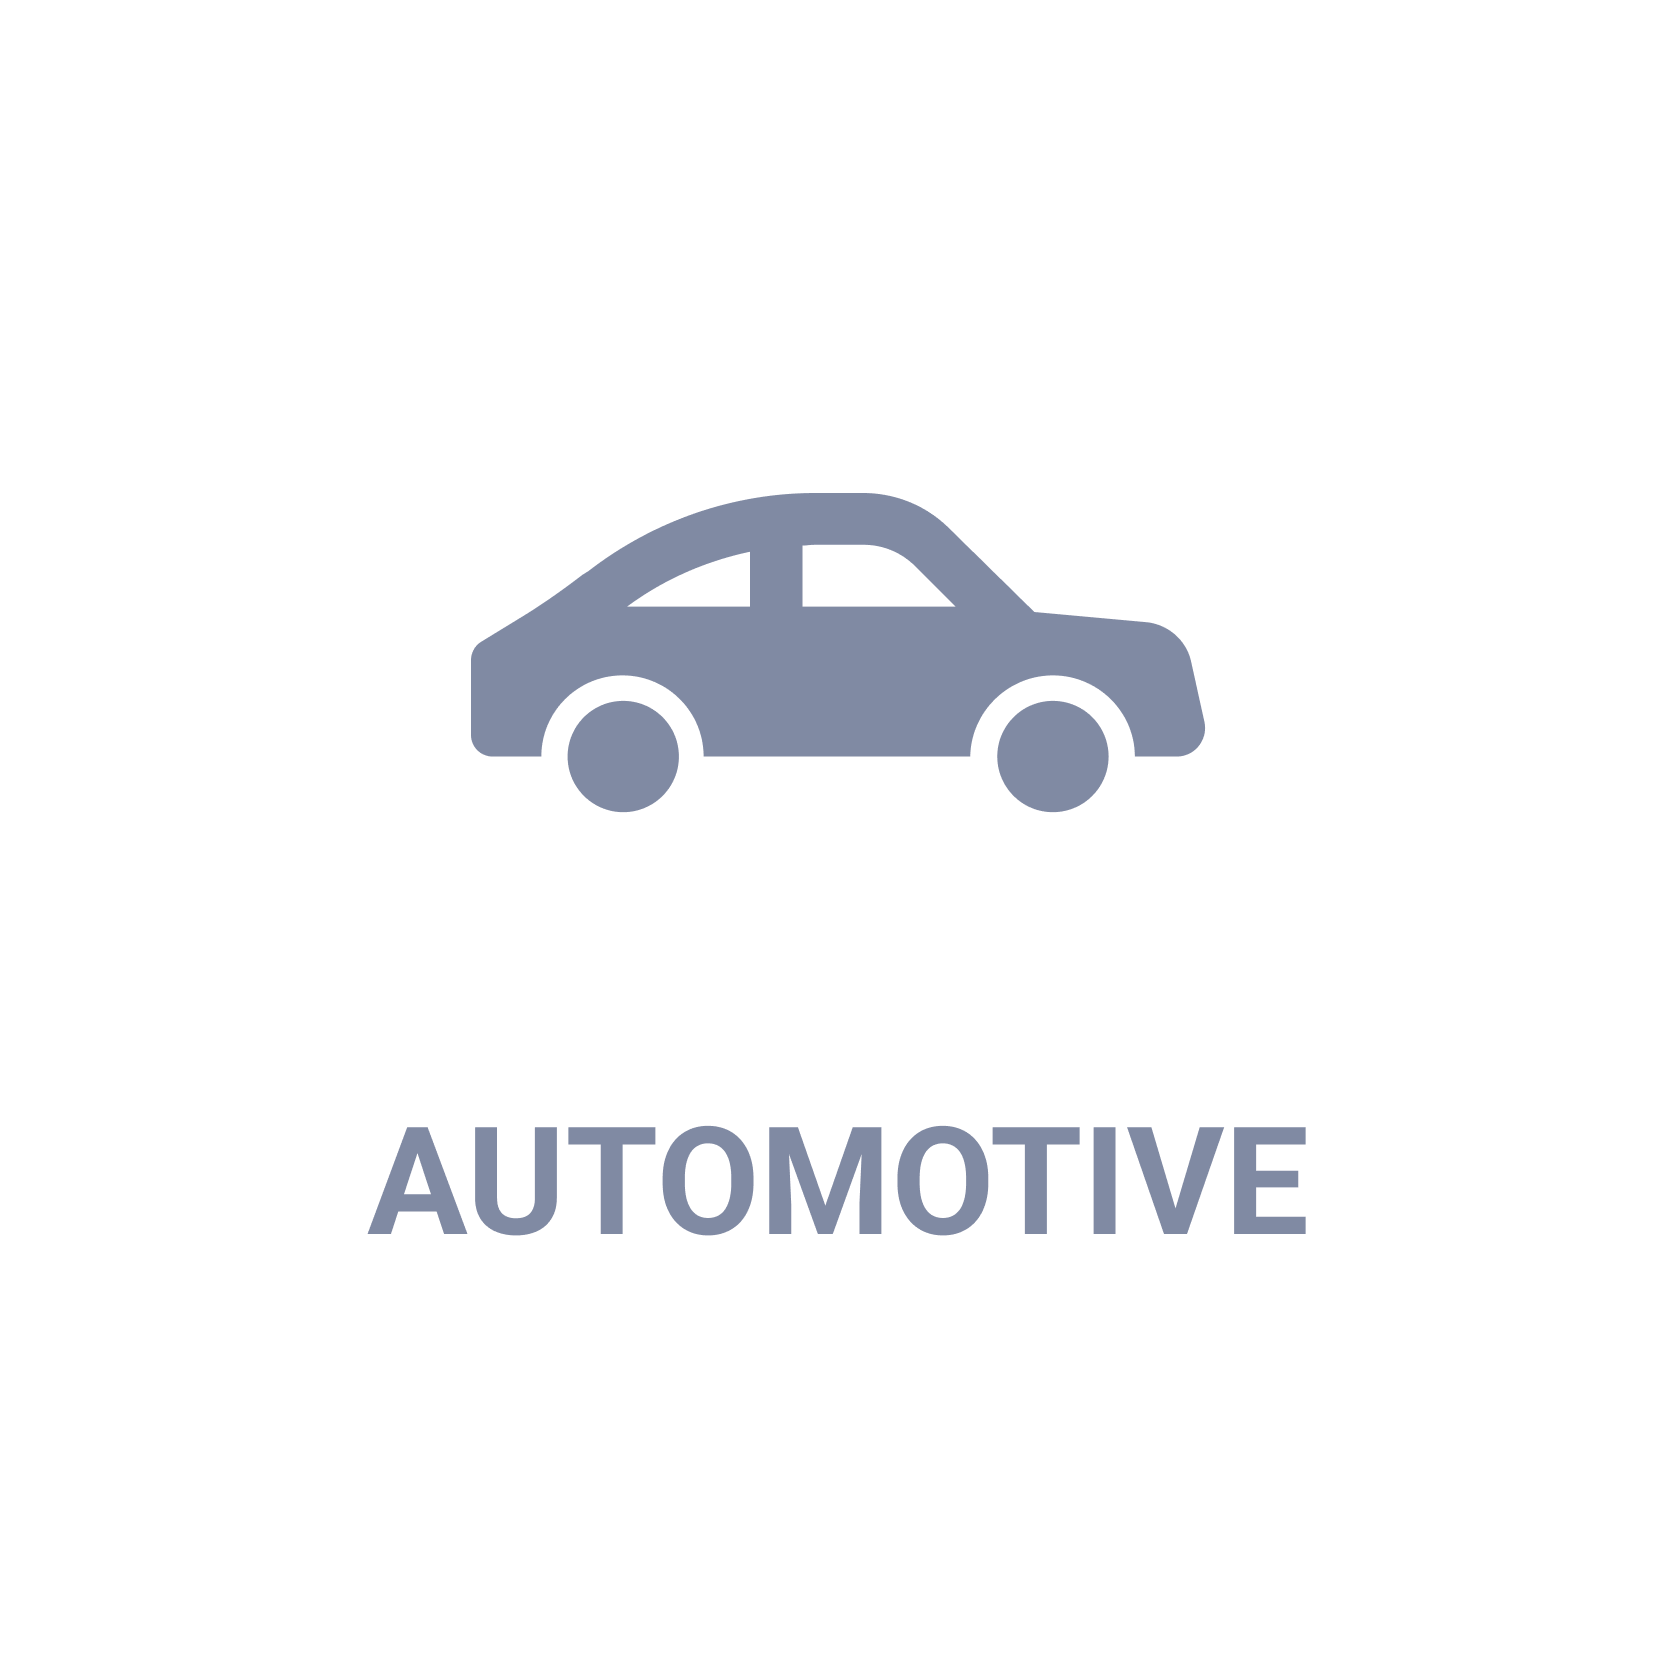 Security consulting - Automotive icon